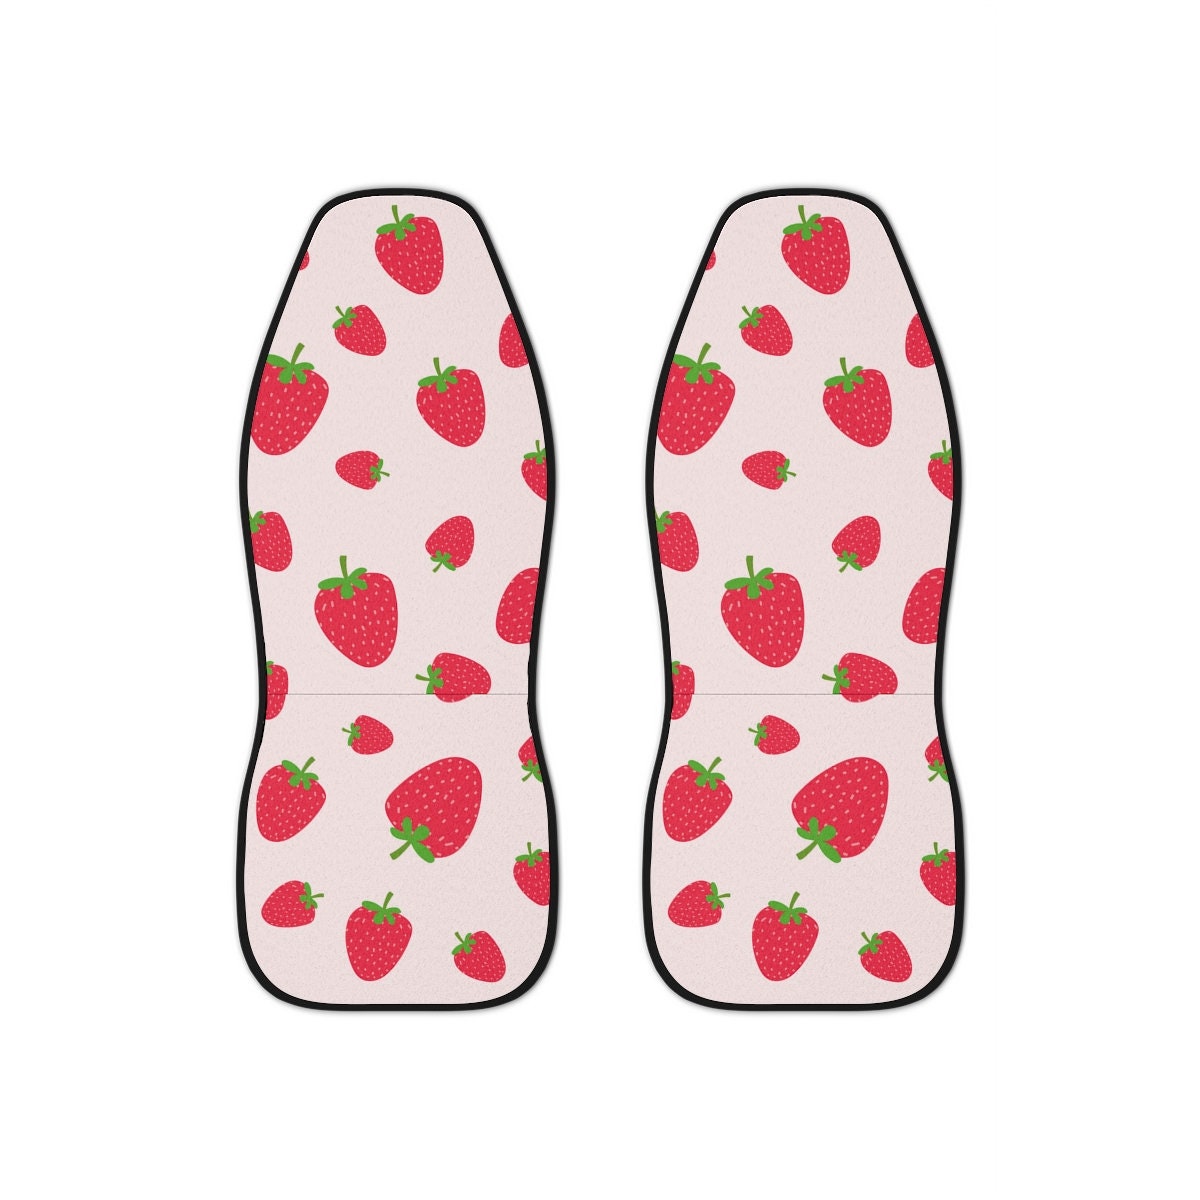 Car Seat Covers, Strawberry Cute Car Accessories for Women, Strawberries Hippie Car Decor, Universal  Chair Cover, Boho Vehicle Seat Cover HMDesignStudioUS